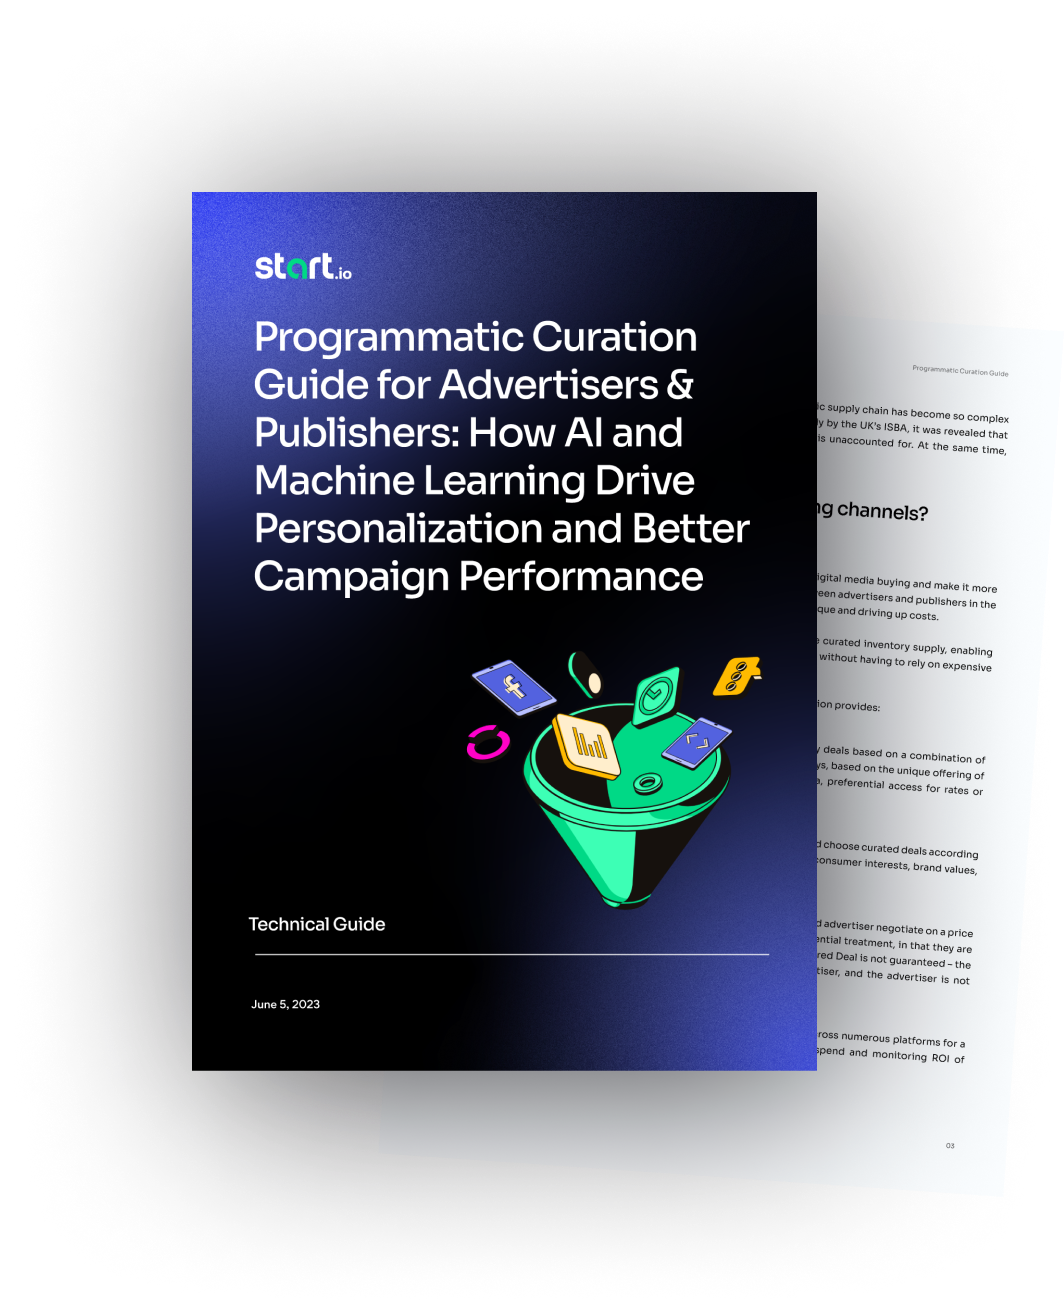 Programmatic Curation Guide for Advertisers & Publishers